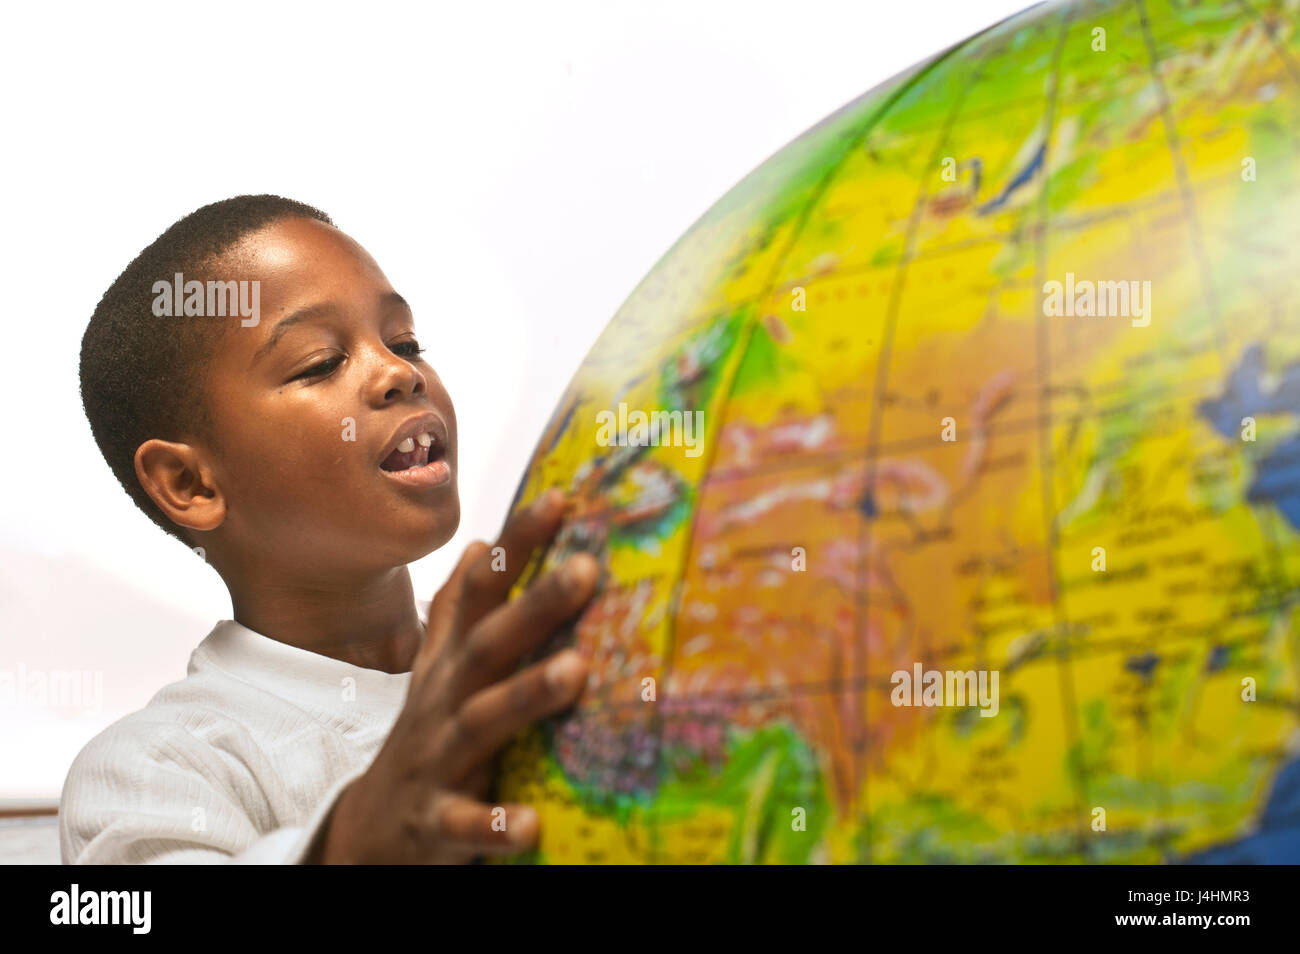 A happy healthy African American boy looking at an inflatable globe on a white background. The globe is soft focus, in the foreground and shows China Stock Photo